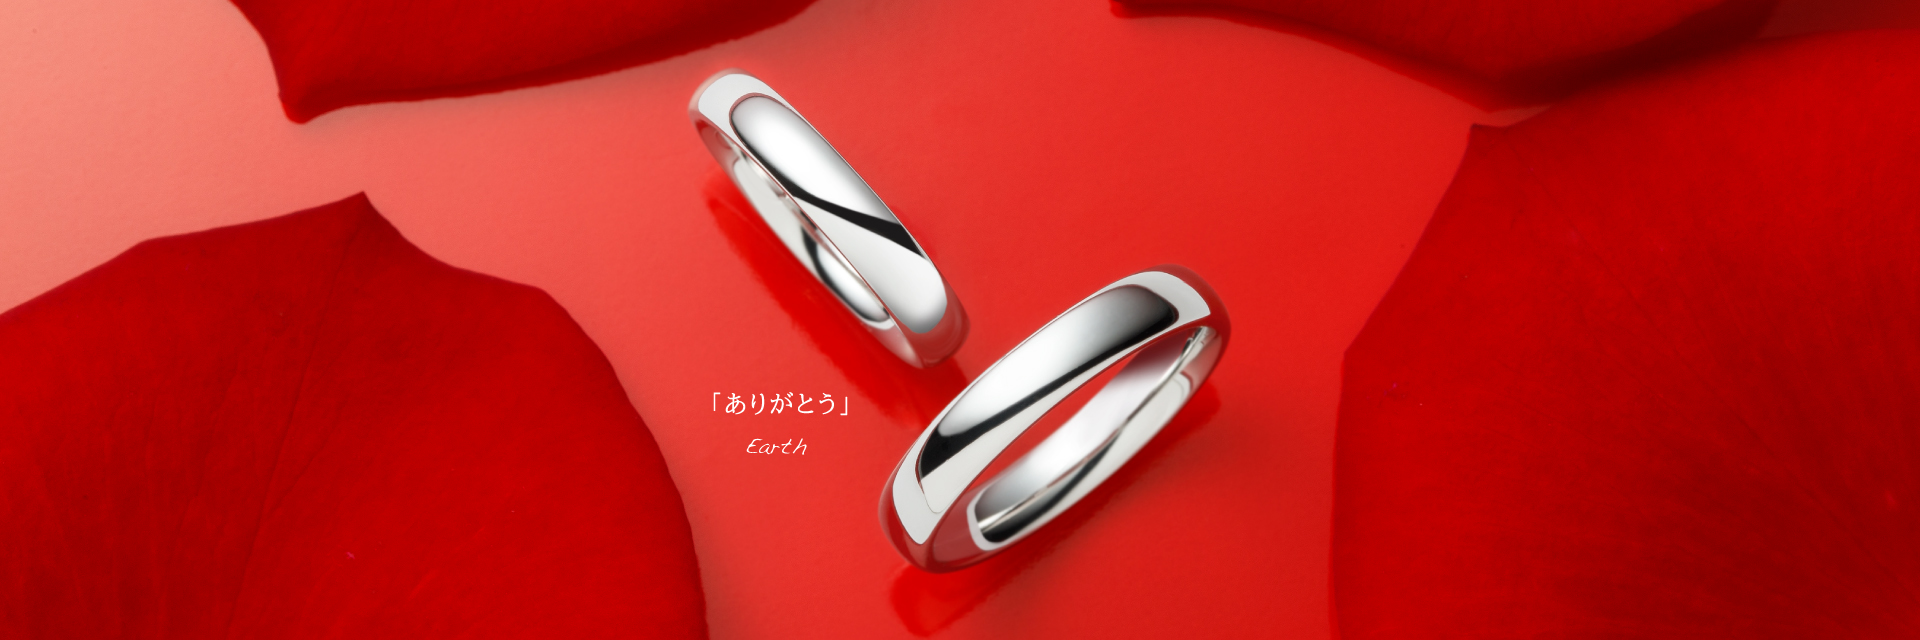 marriage ring